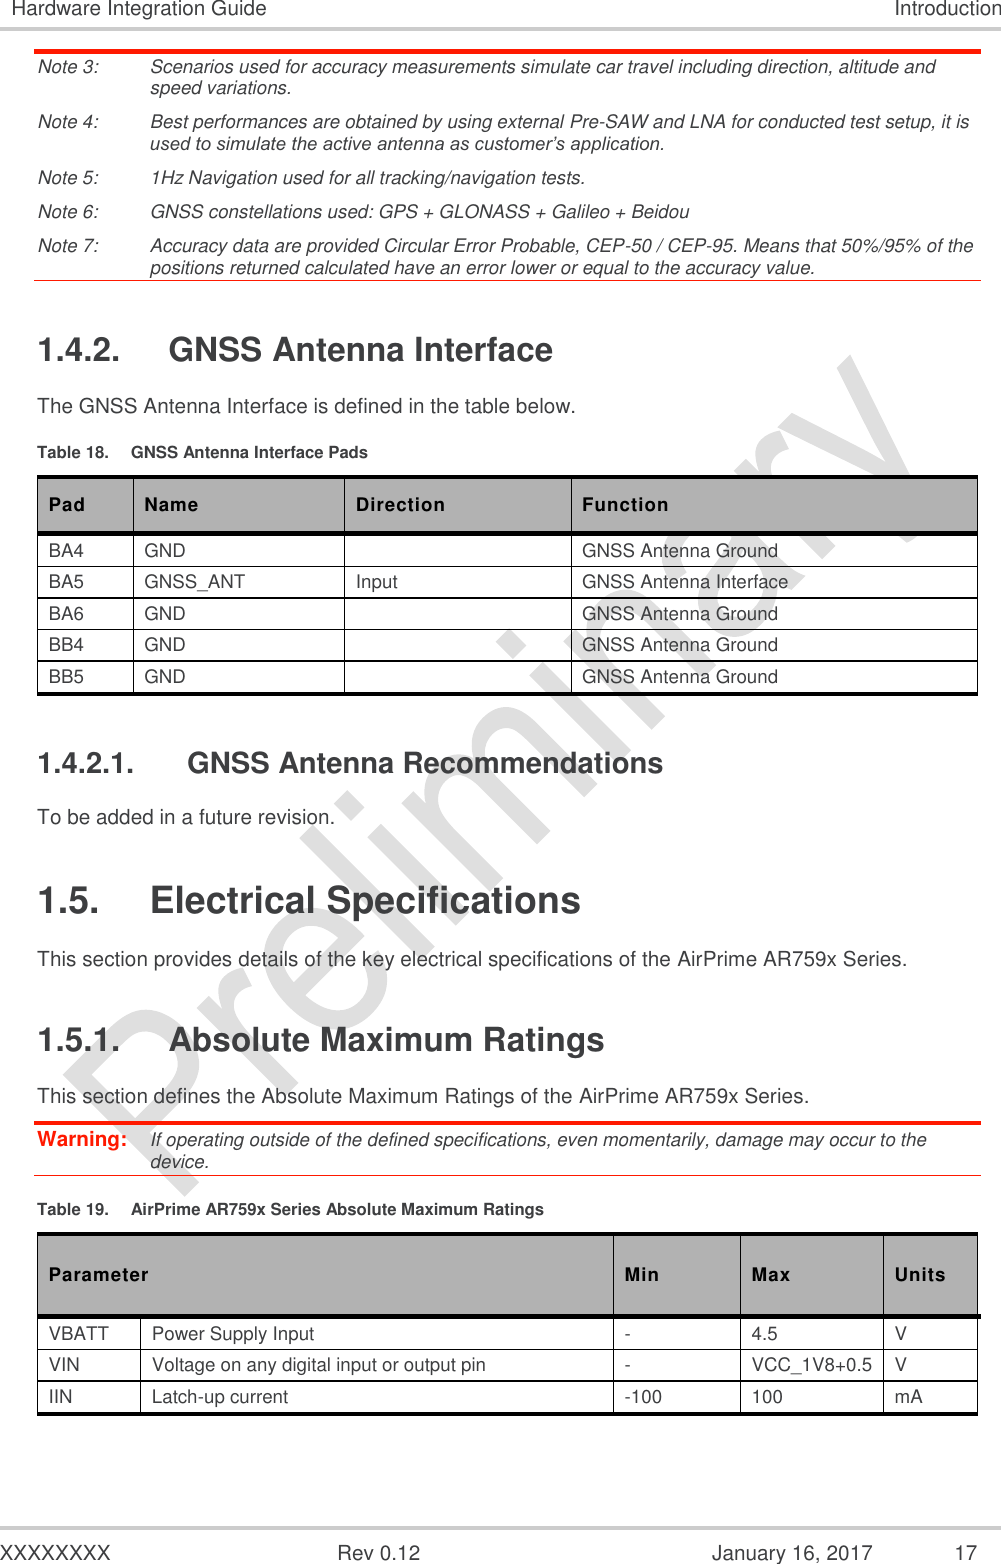  XXXXXXXX  Rev 0.12  January 16, 2017 17 Hardware Integration Guide Introduction Note 3:  Scenarios used for accuracy measurements simulate car travel including direction, altitude and speed variations. Note 4:  Best performances are obtained by using external Pre-SAW and LNA for conducted test setup, it is used to simulate the active antenna as customer’s application.  Note 5:  1Hz Navigation used for all tracking/navigation tests. Note 6:  GNSS constellations used: GPS + GLONASS + Galileo + Beidou Note 7:  Accuracy data are provided Circular Error Probable, CEP-50 / CEP-95. Means that 50%/95% of the positions returned calculated have an error lower or equal to the accuracy value. 1.4.2.  GNSS Antenna Interface The GNSS Antenna Interface is defined in the table below. Table 18.  GNSS Antenna Interface Pads Pad Name Direction Function BA4 GND   GNSS Antenna Ground BA5 GNSS_ANT Input GNSS Antenna Interface BA6 GND   GNSS Antenna Ground BB4 GND   GNSS Antenna Ground BB5 GND   GNSS Antenna Ground 1.4.2.1.  GNSS Antenna Recommendations To be added in a future revision. 1.5.  Electrical Specifications This section provides details of the key electrical specifications of the AirPrime AR759x Series. 1.5.1.  Absolute Maximum Ratings This section defines the Absolute Maximum Ratings of the AirPrime AR759x Series. Warning:   If operating outside of the defined specifications, even momentarily, damage may occur to the device. Table 19.  AirPrime AR759x Series Absolute Maximum Ratings Parameter Min Max Units VBATT Power Supply Input - 4.5 V VIN Voltage on any digital input or output pin - VCC_1V8+0.5 V IIN Latch-up current -100 100 mA 